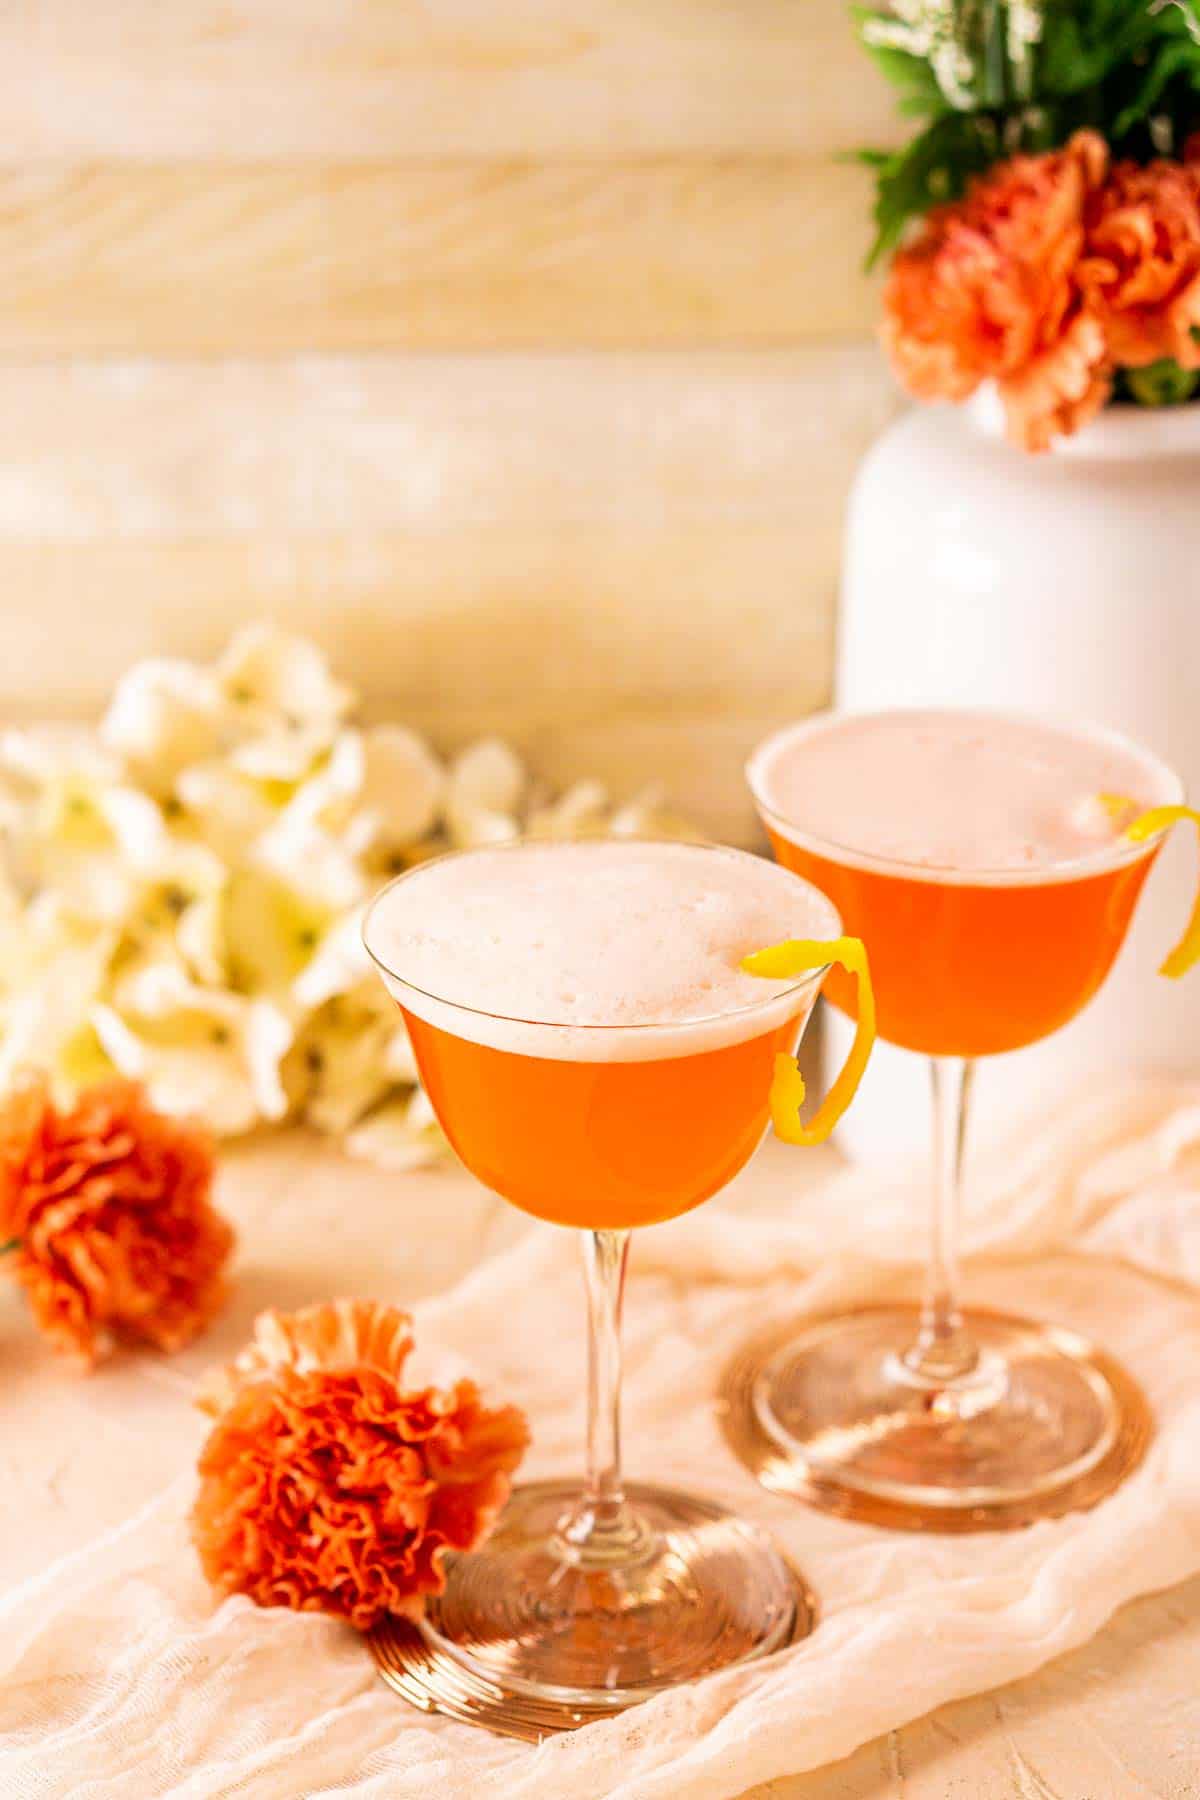 Looking down on two Aperol sour cocktails with an orange flower to the side and a bundle of white flowers in the background.